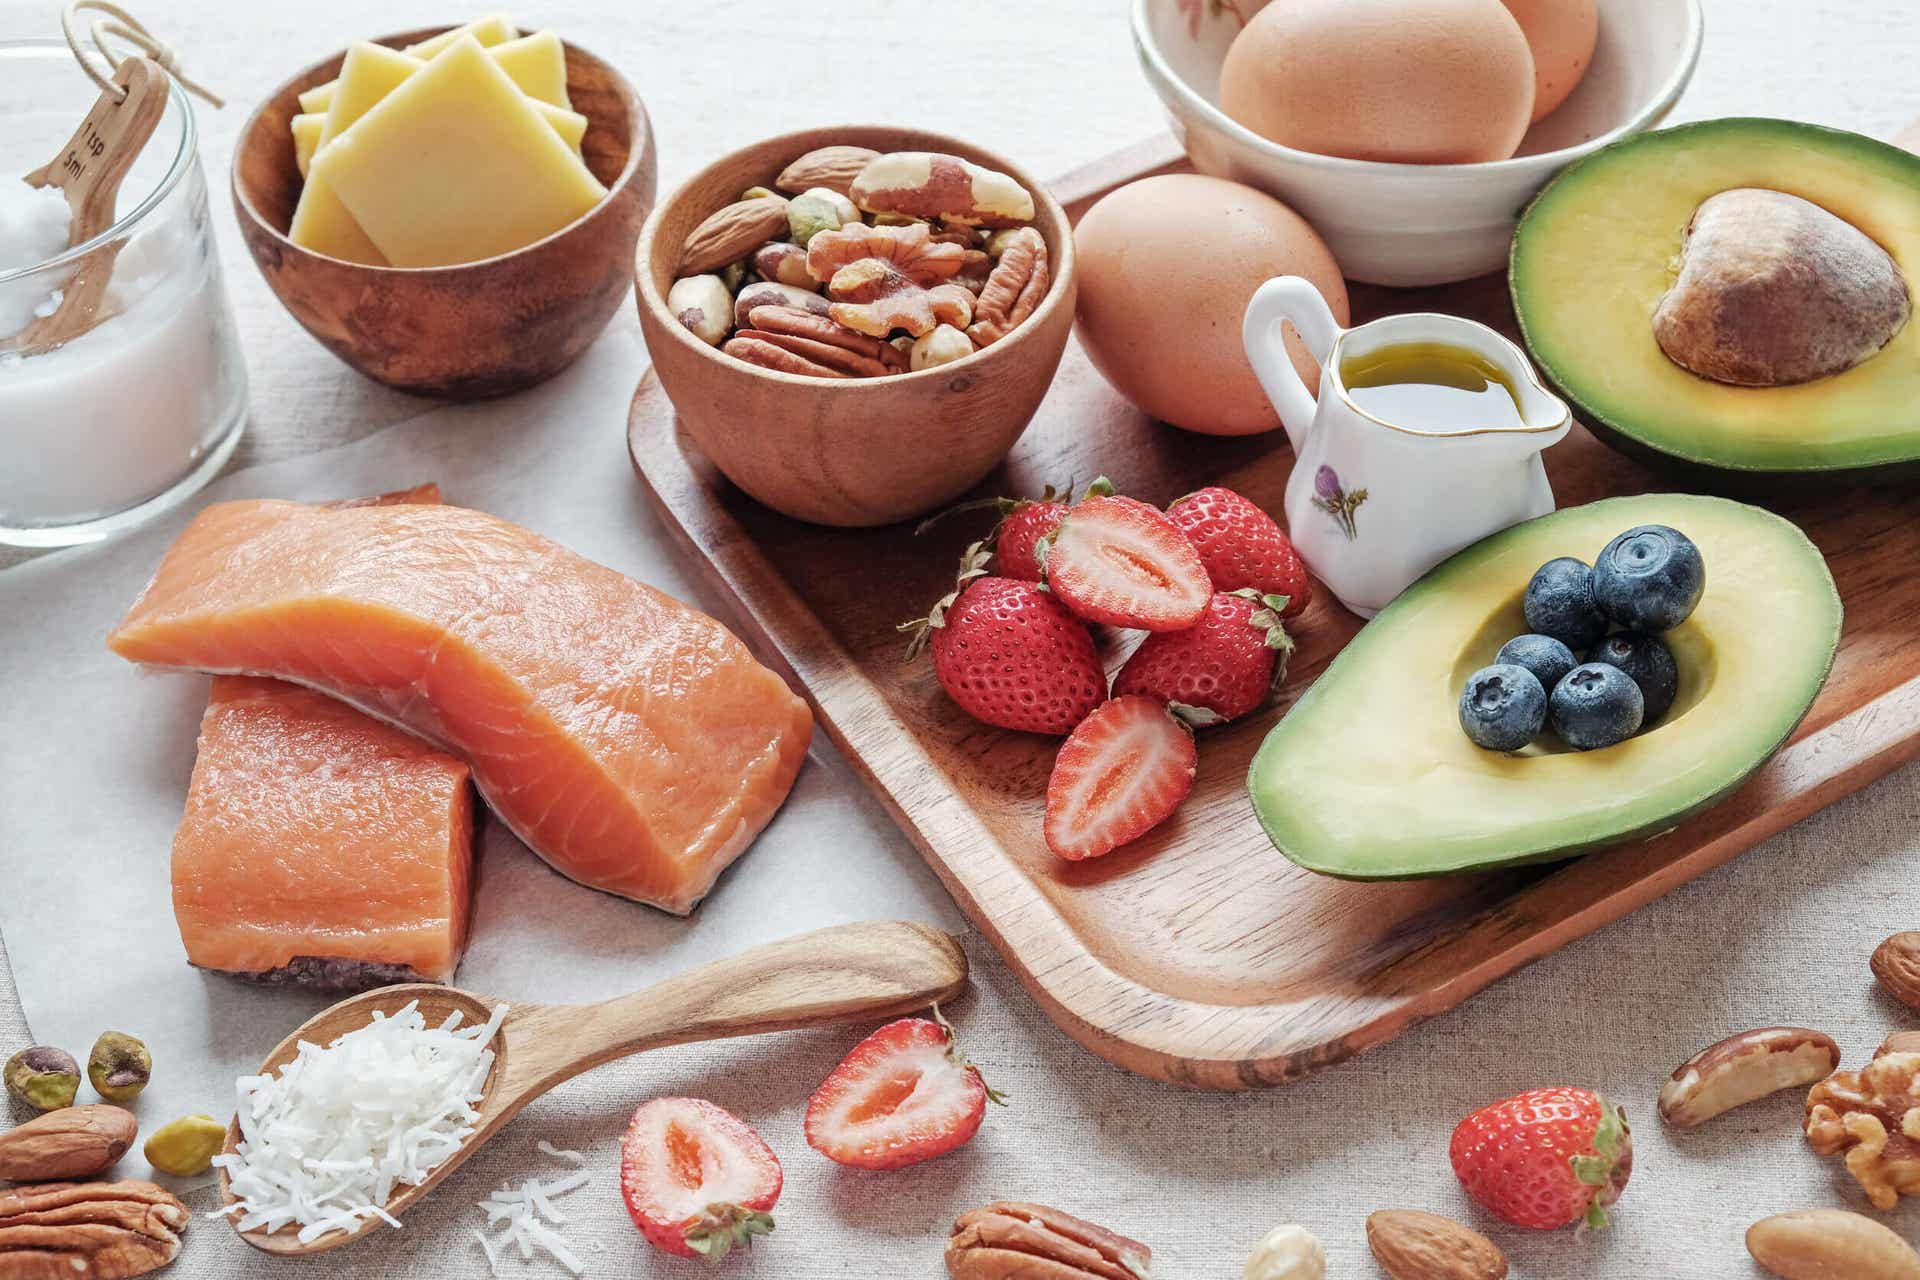 Salmon, nuts, eggs, cheese, berries, and avocado.